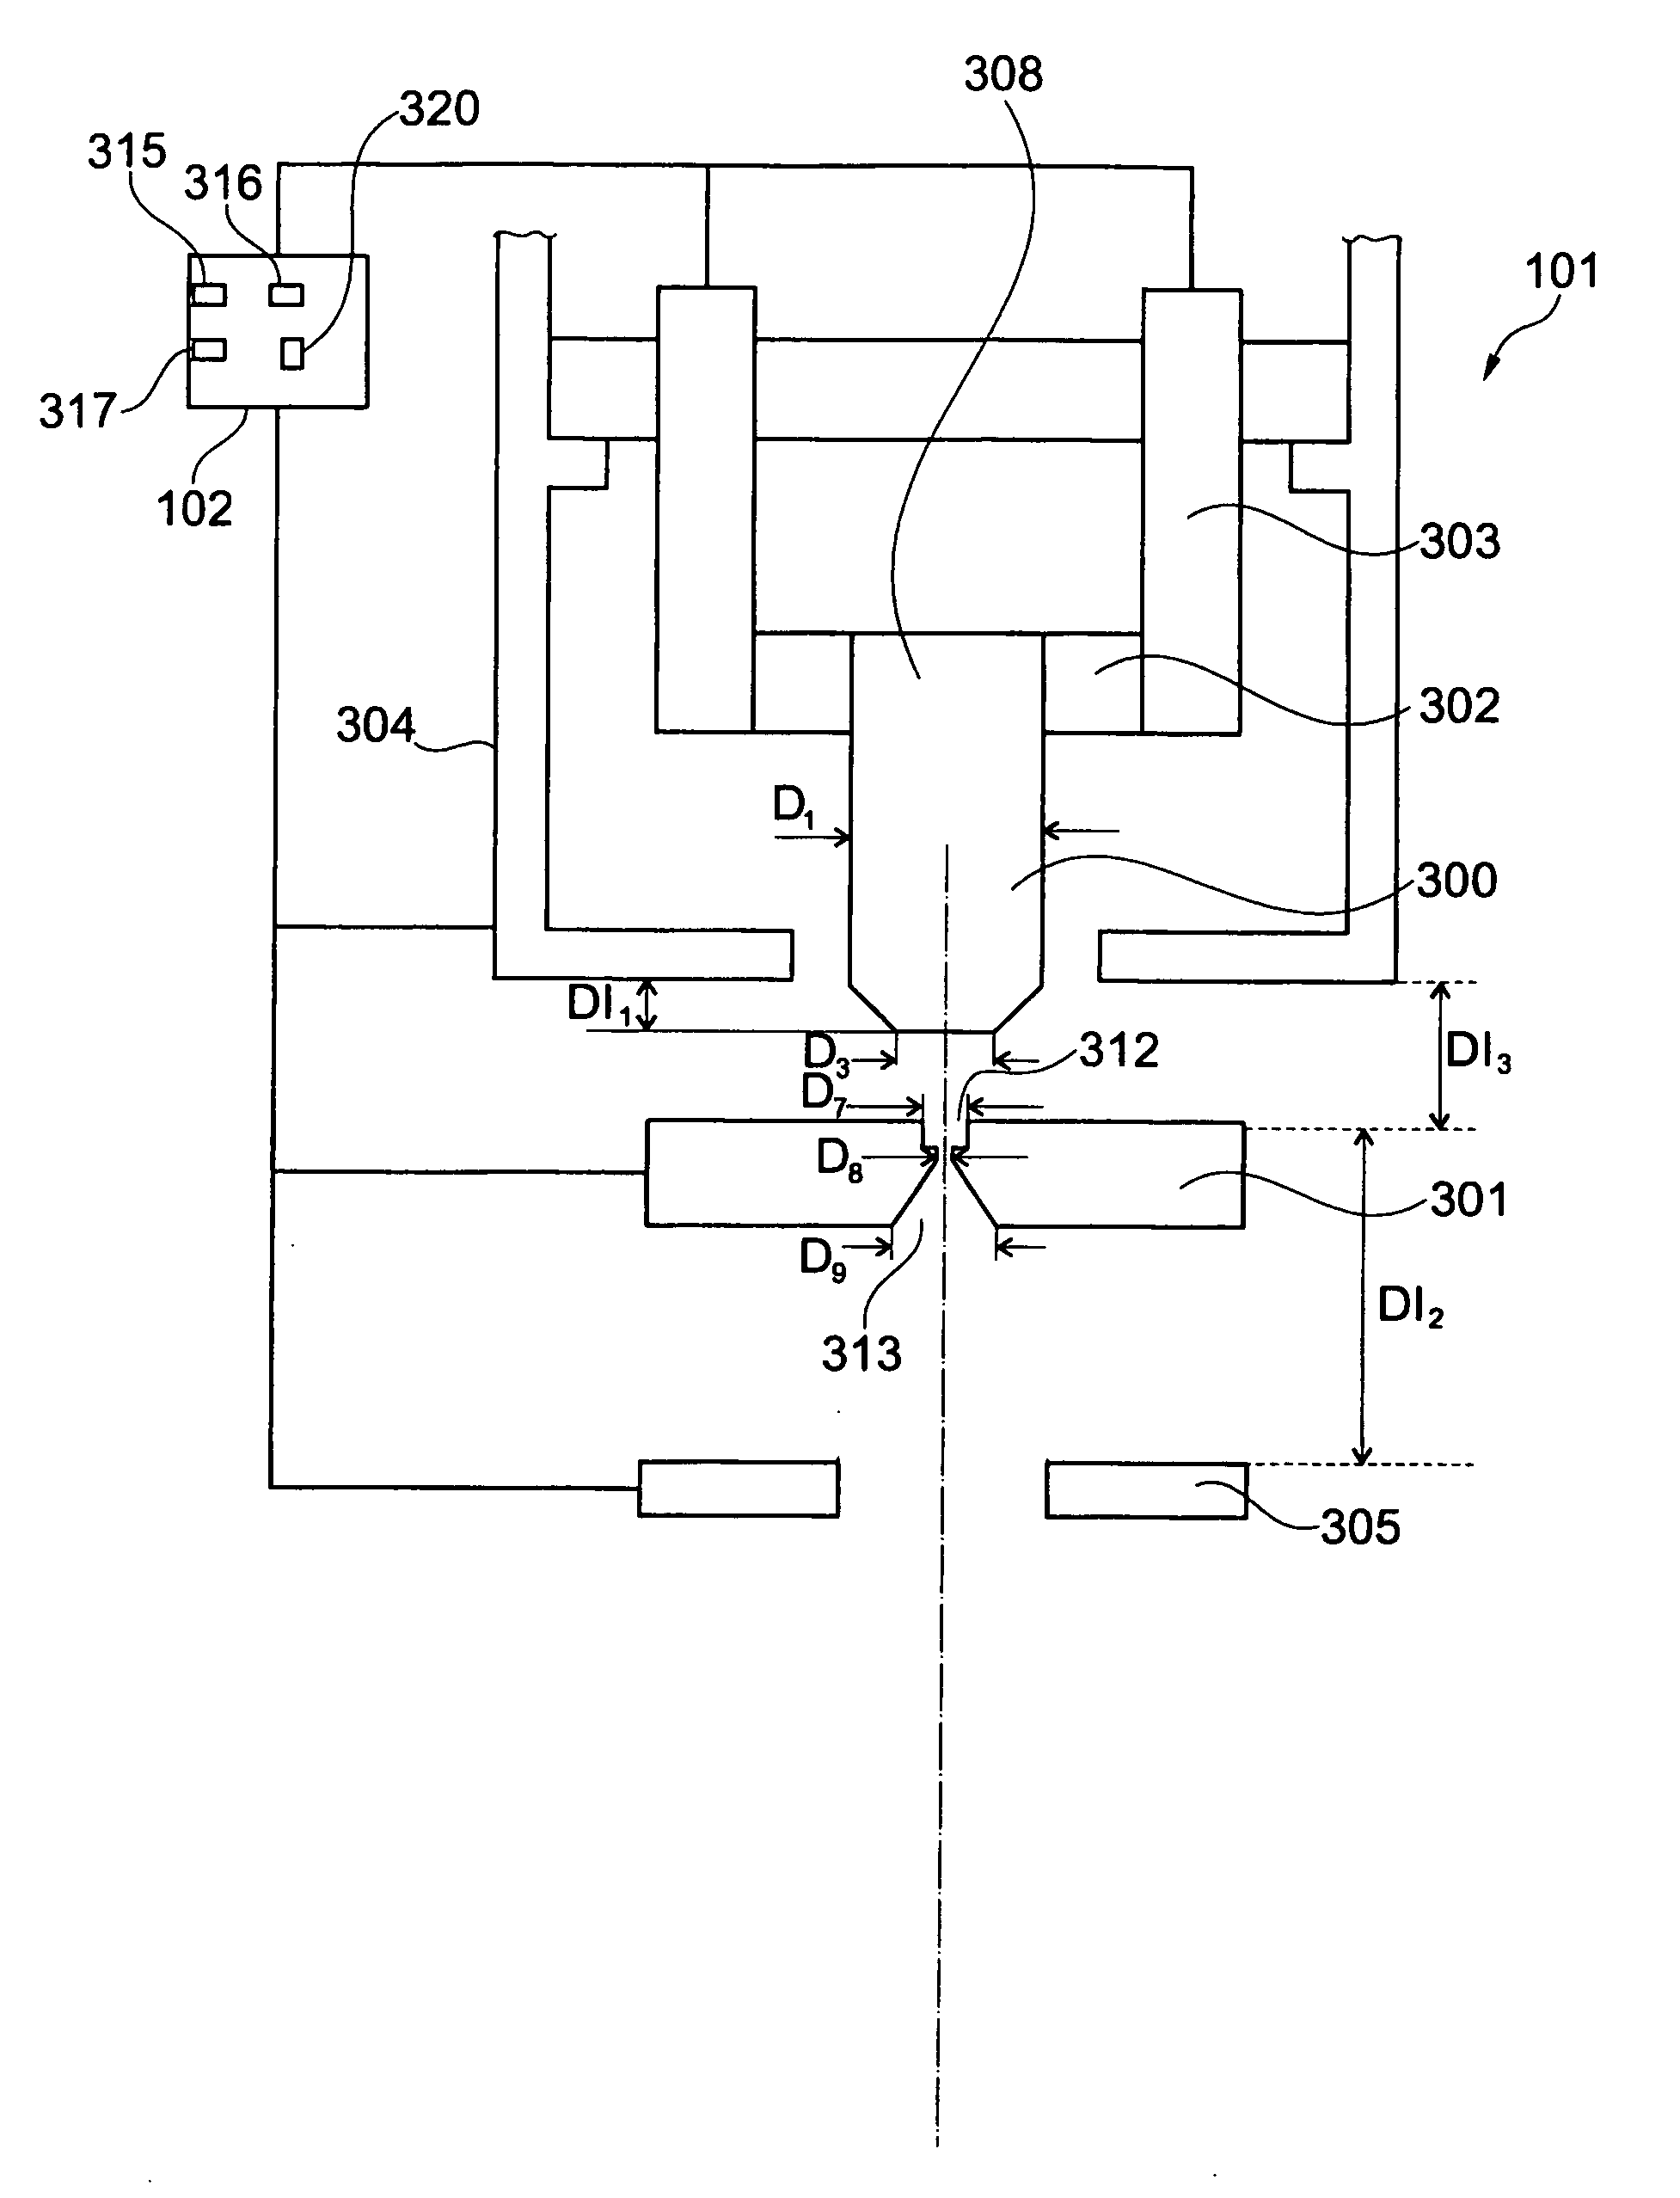 Electron gun used in particle beam device